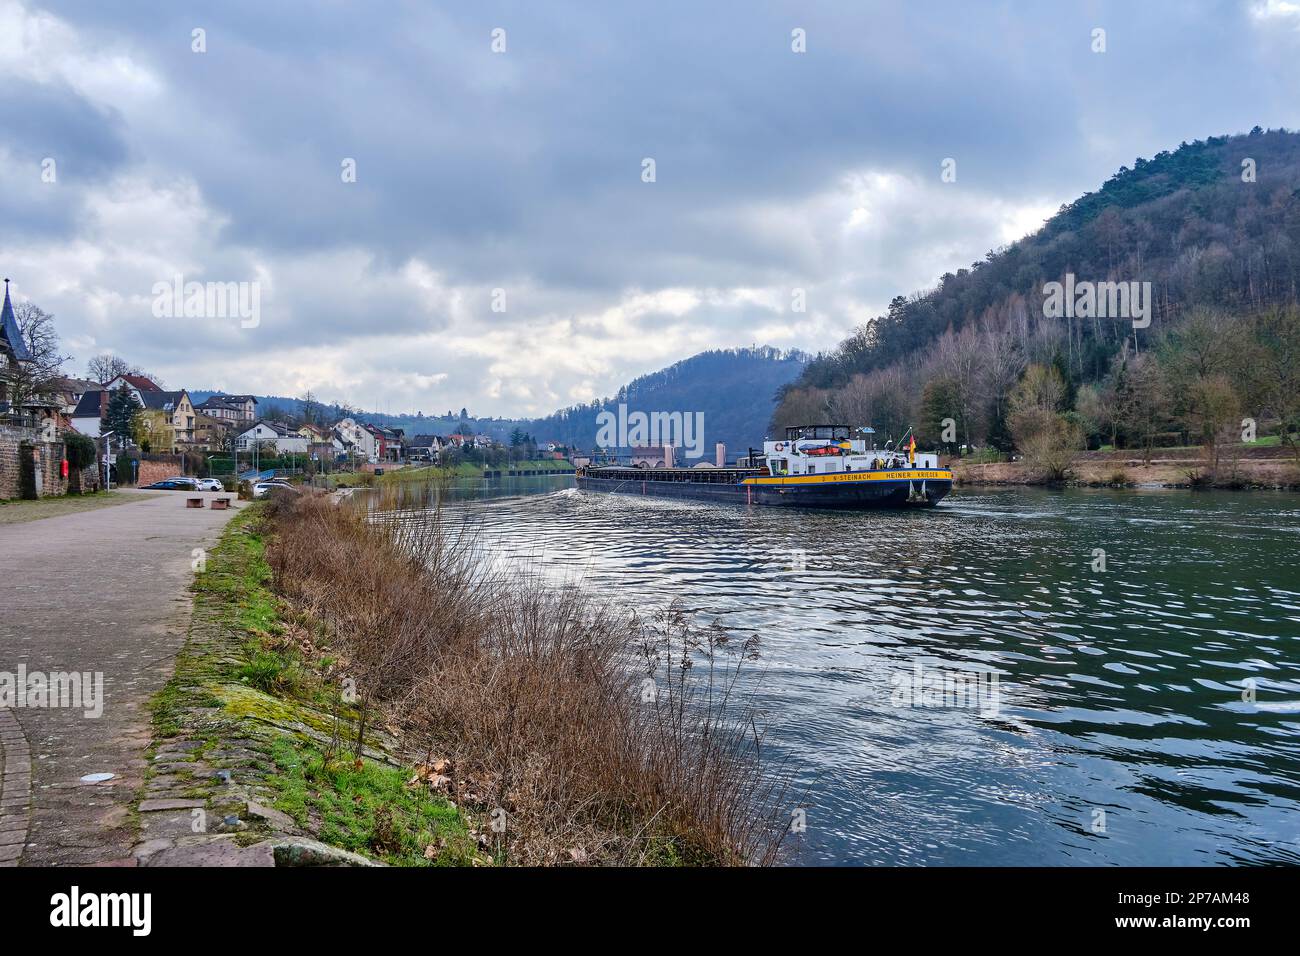 The inland freighter MS Heiner Krieger approaches the Neckarsteinach lock in Neckarsteinach, the Town of Four Castles in Hesse, Germany. Stock Photo